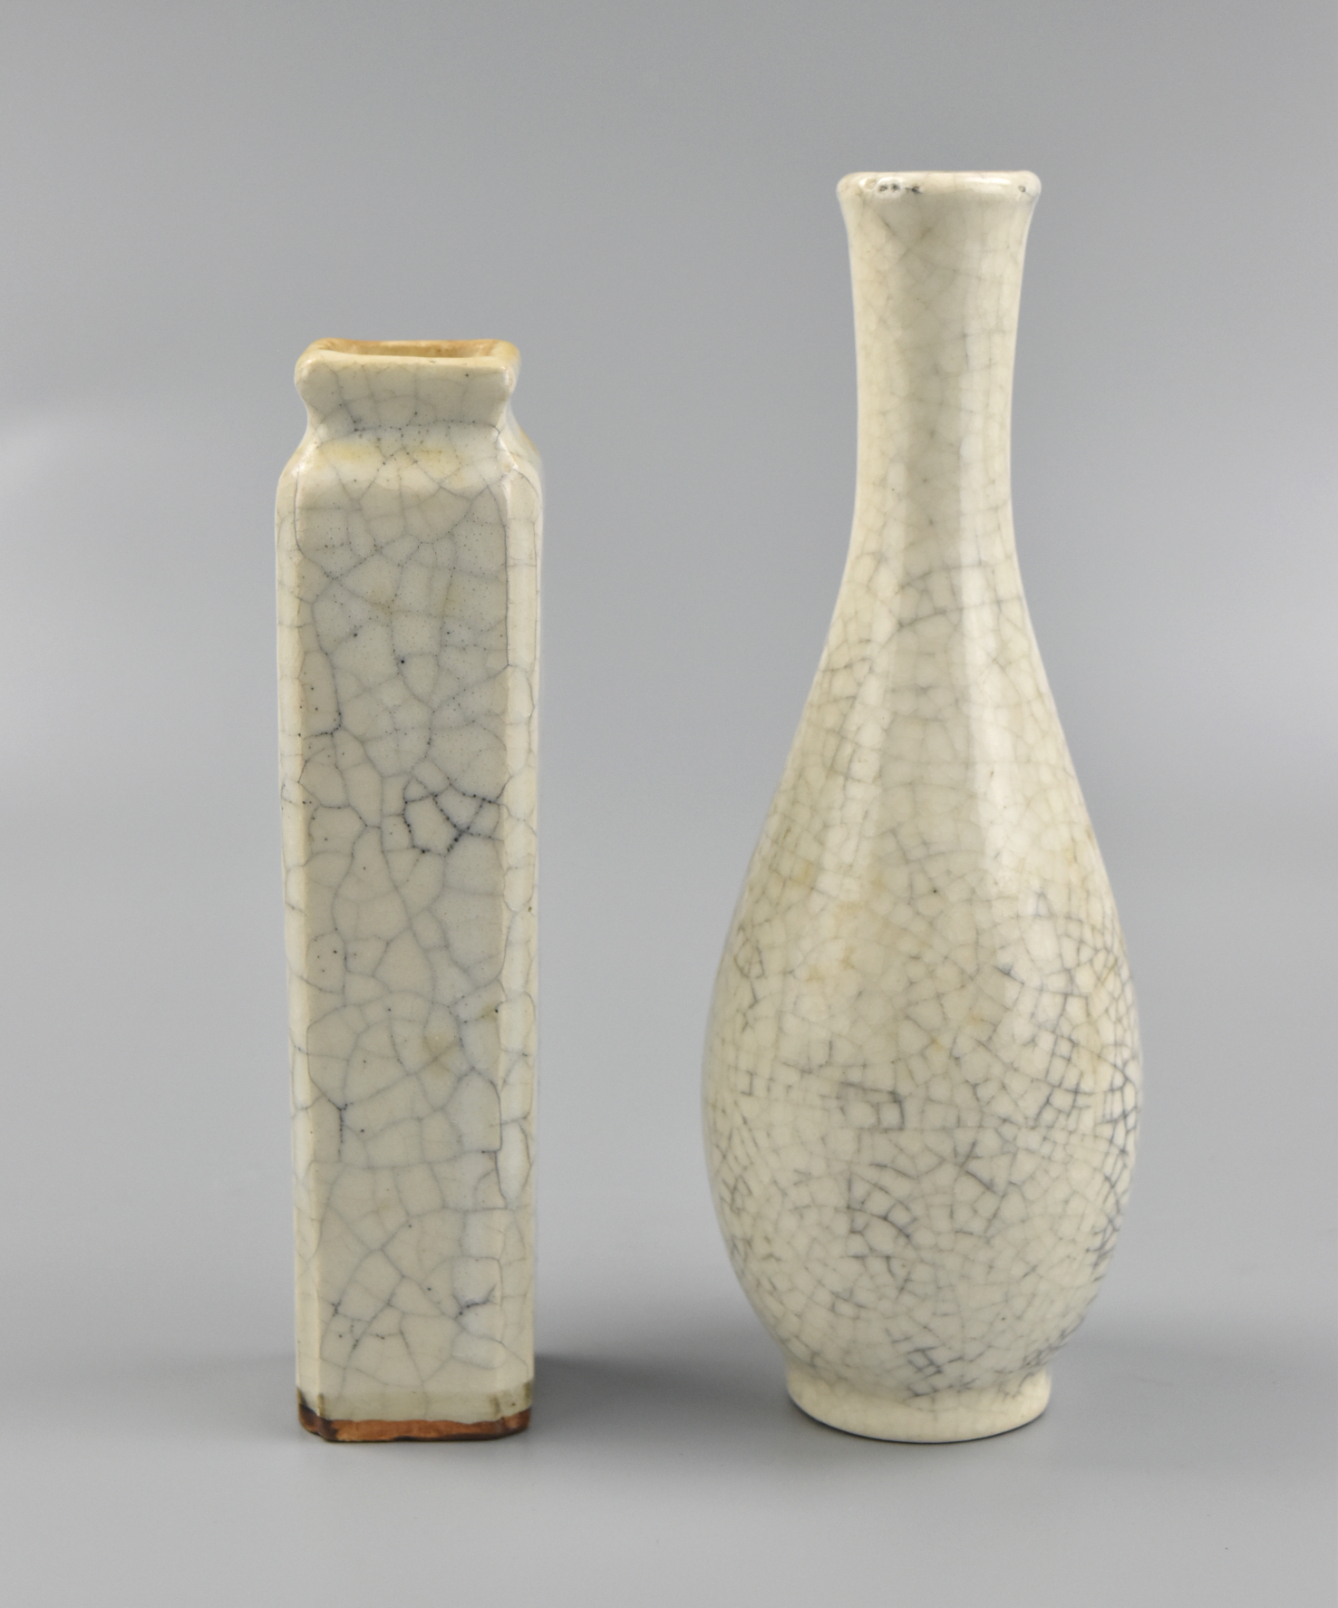 TWO CHINESE GE GLAZE VASES Two 33993a